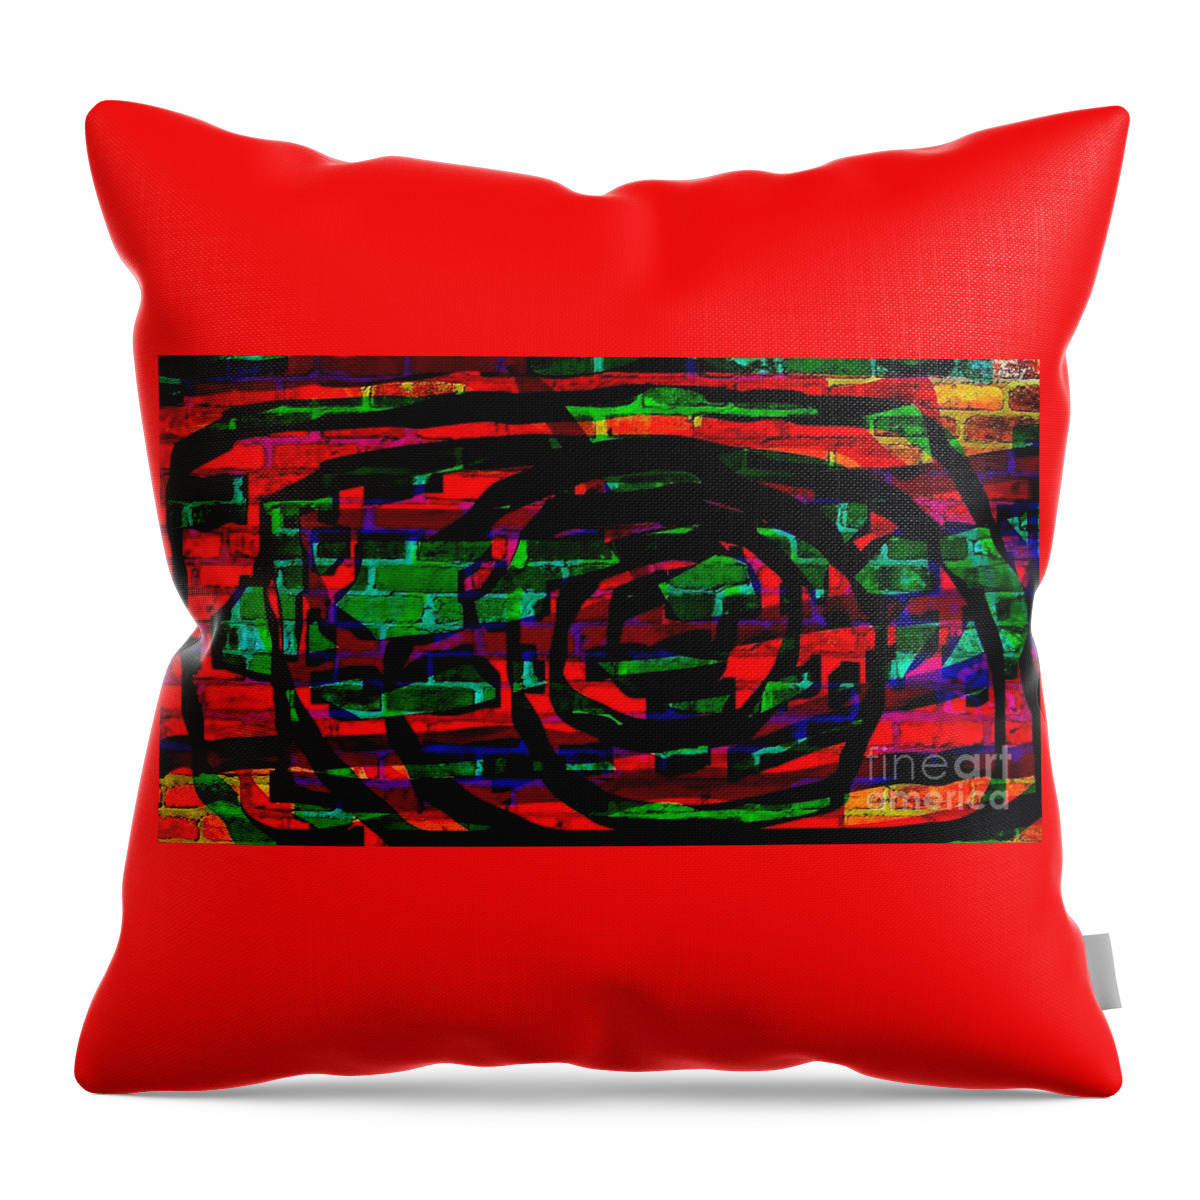 Abstract Throw Pillow featuring the mixed media Abstract Vortex - On A Wall by Leanne Seymour